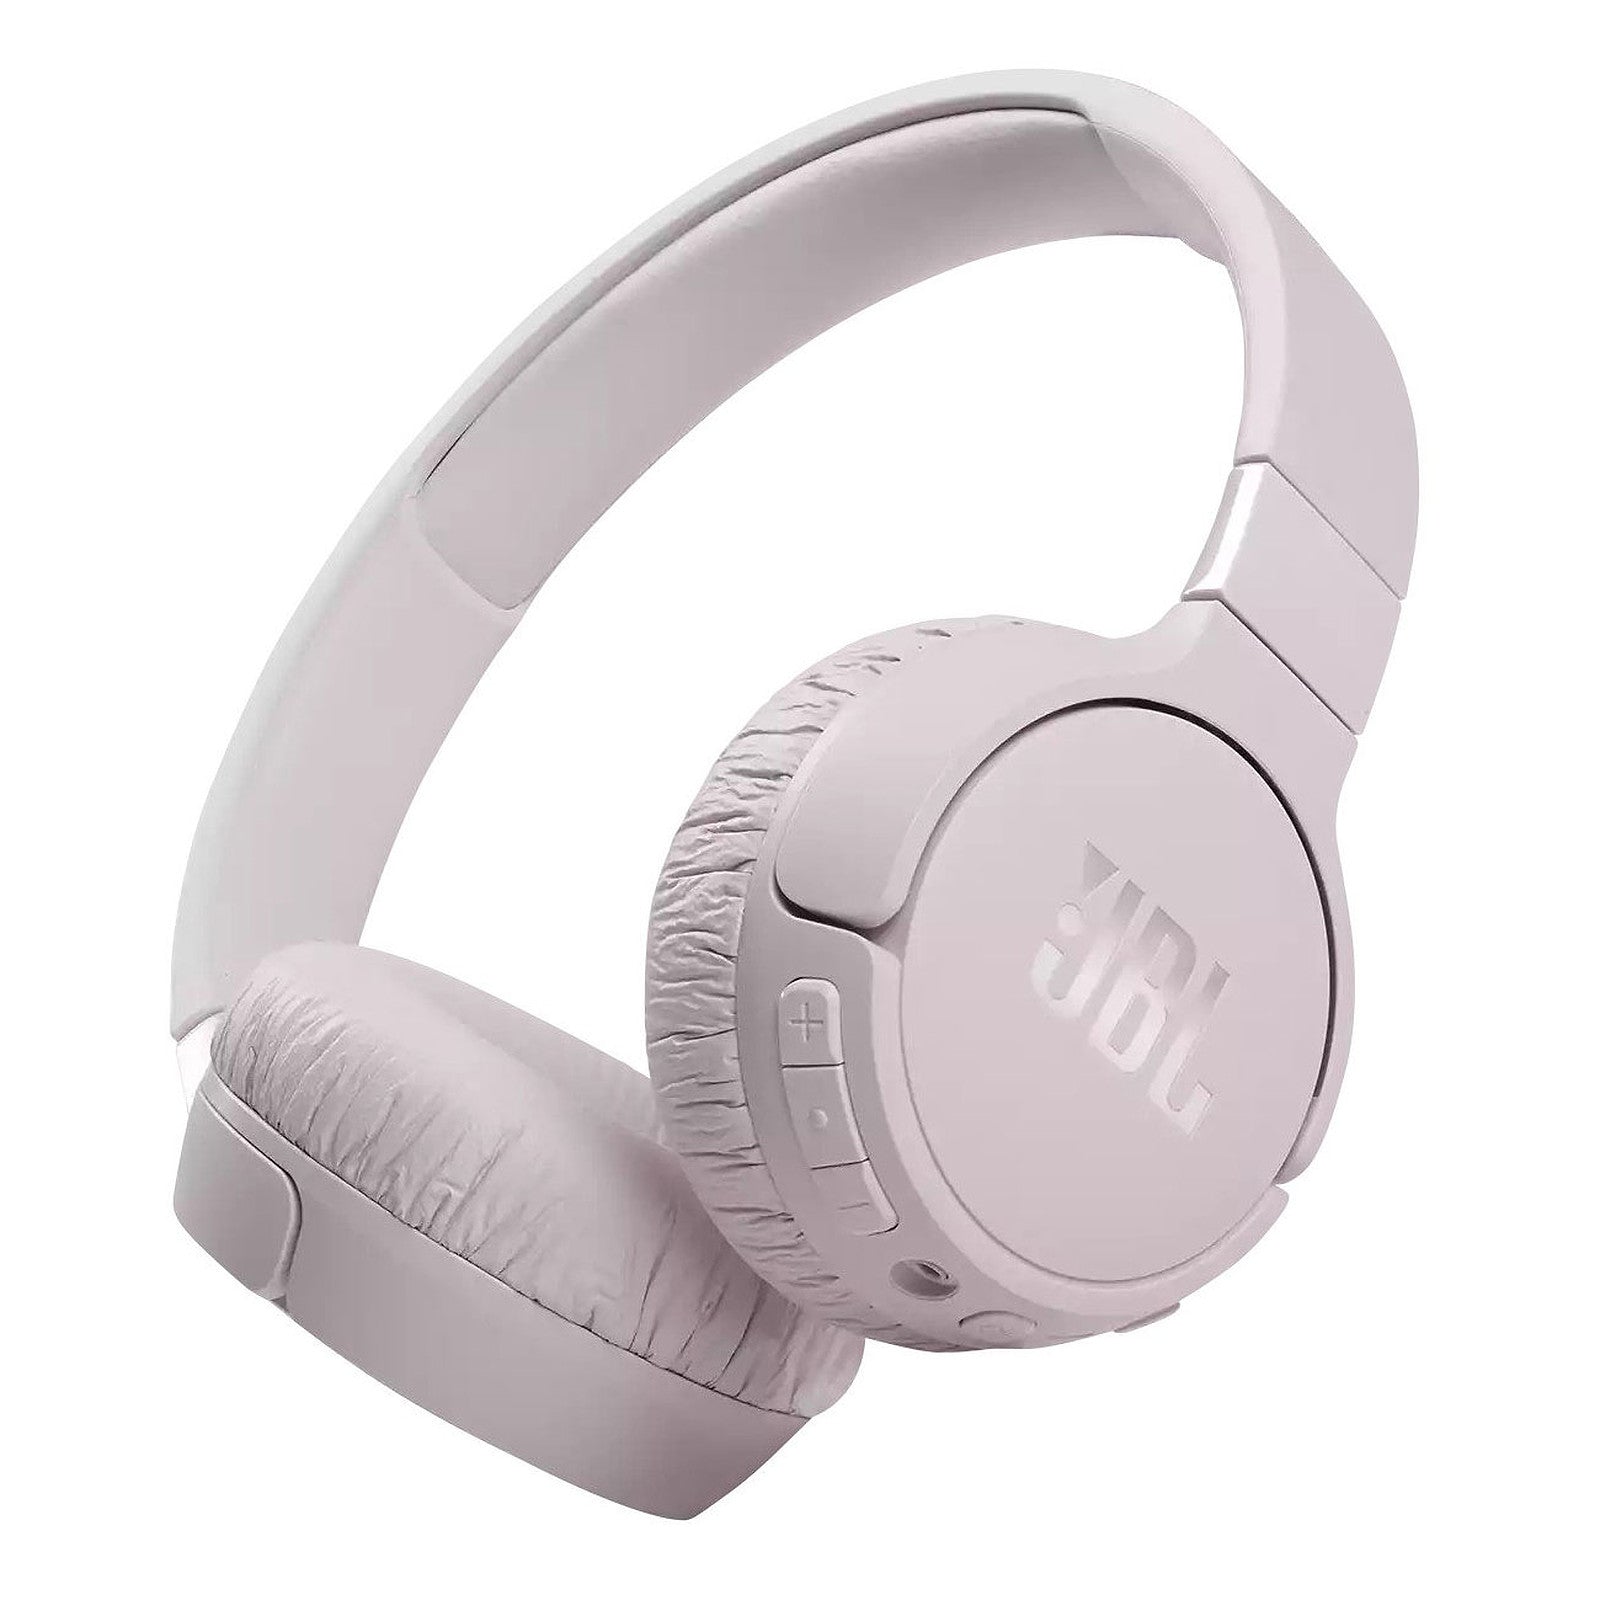 JBL Tune 660NC Wireless active noise-cancelling headphones